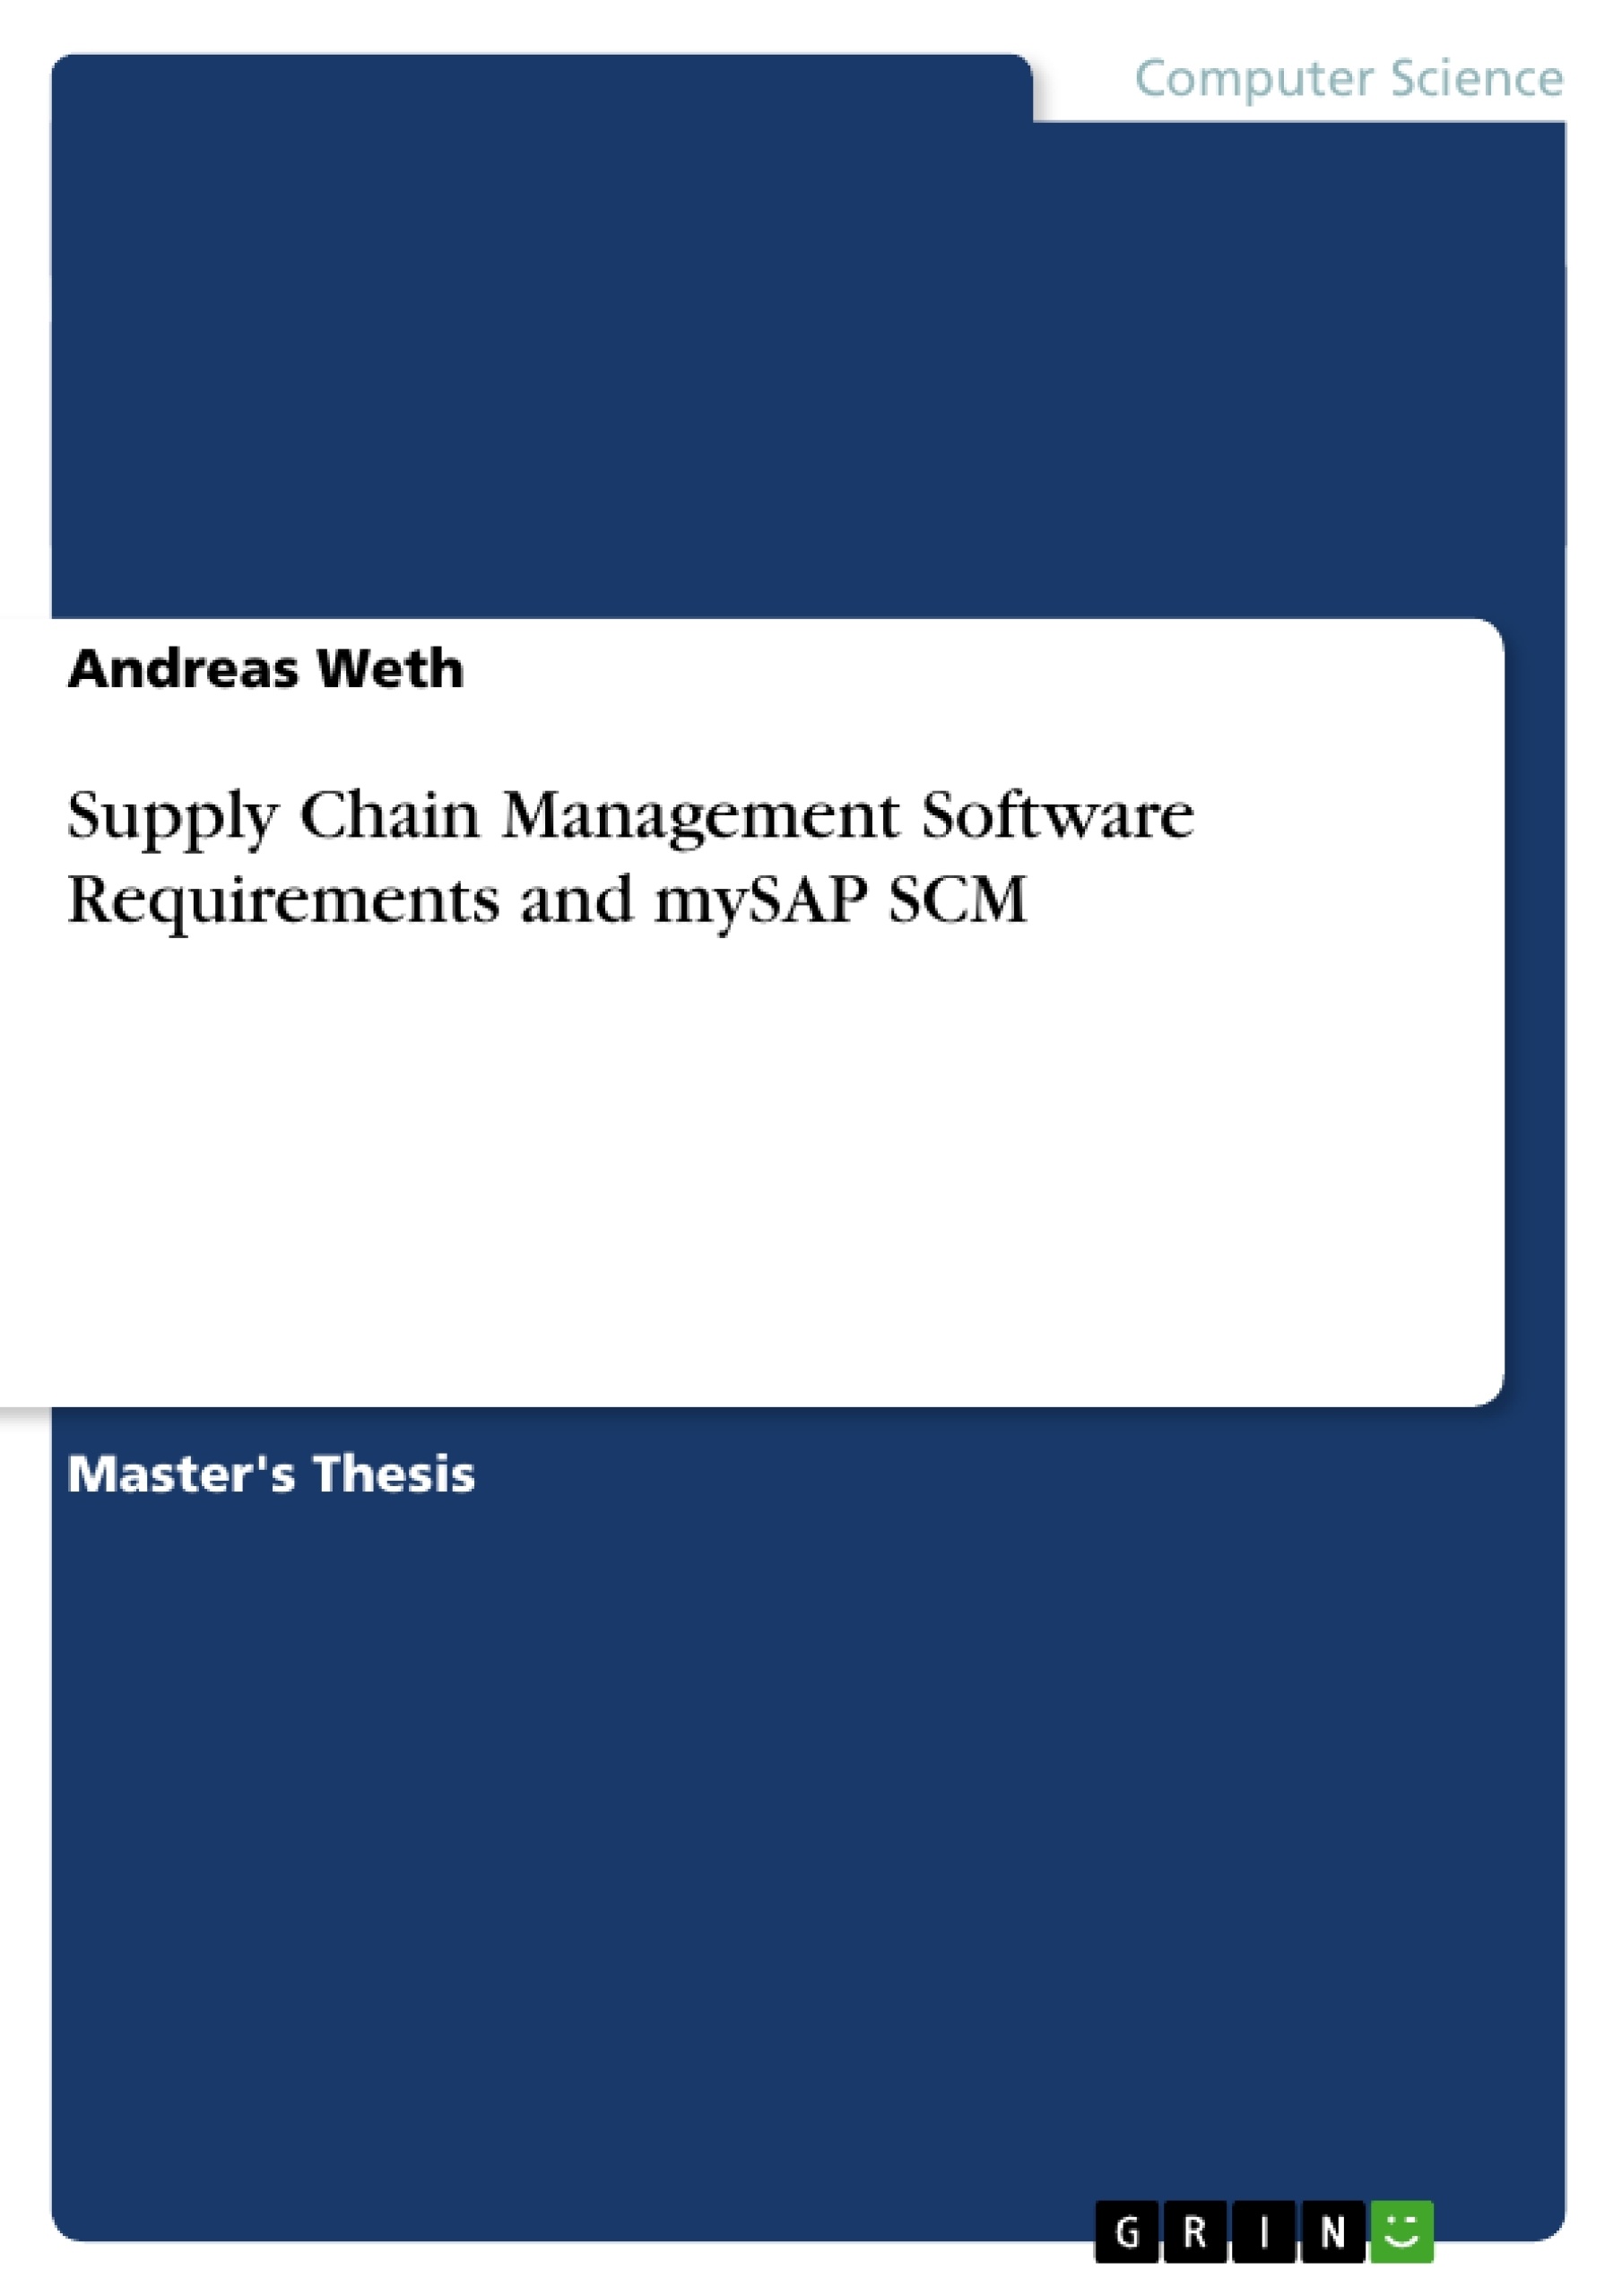 Title: Supply Chain Management Software Requirements and mySAP SCM